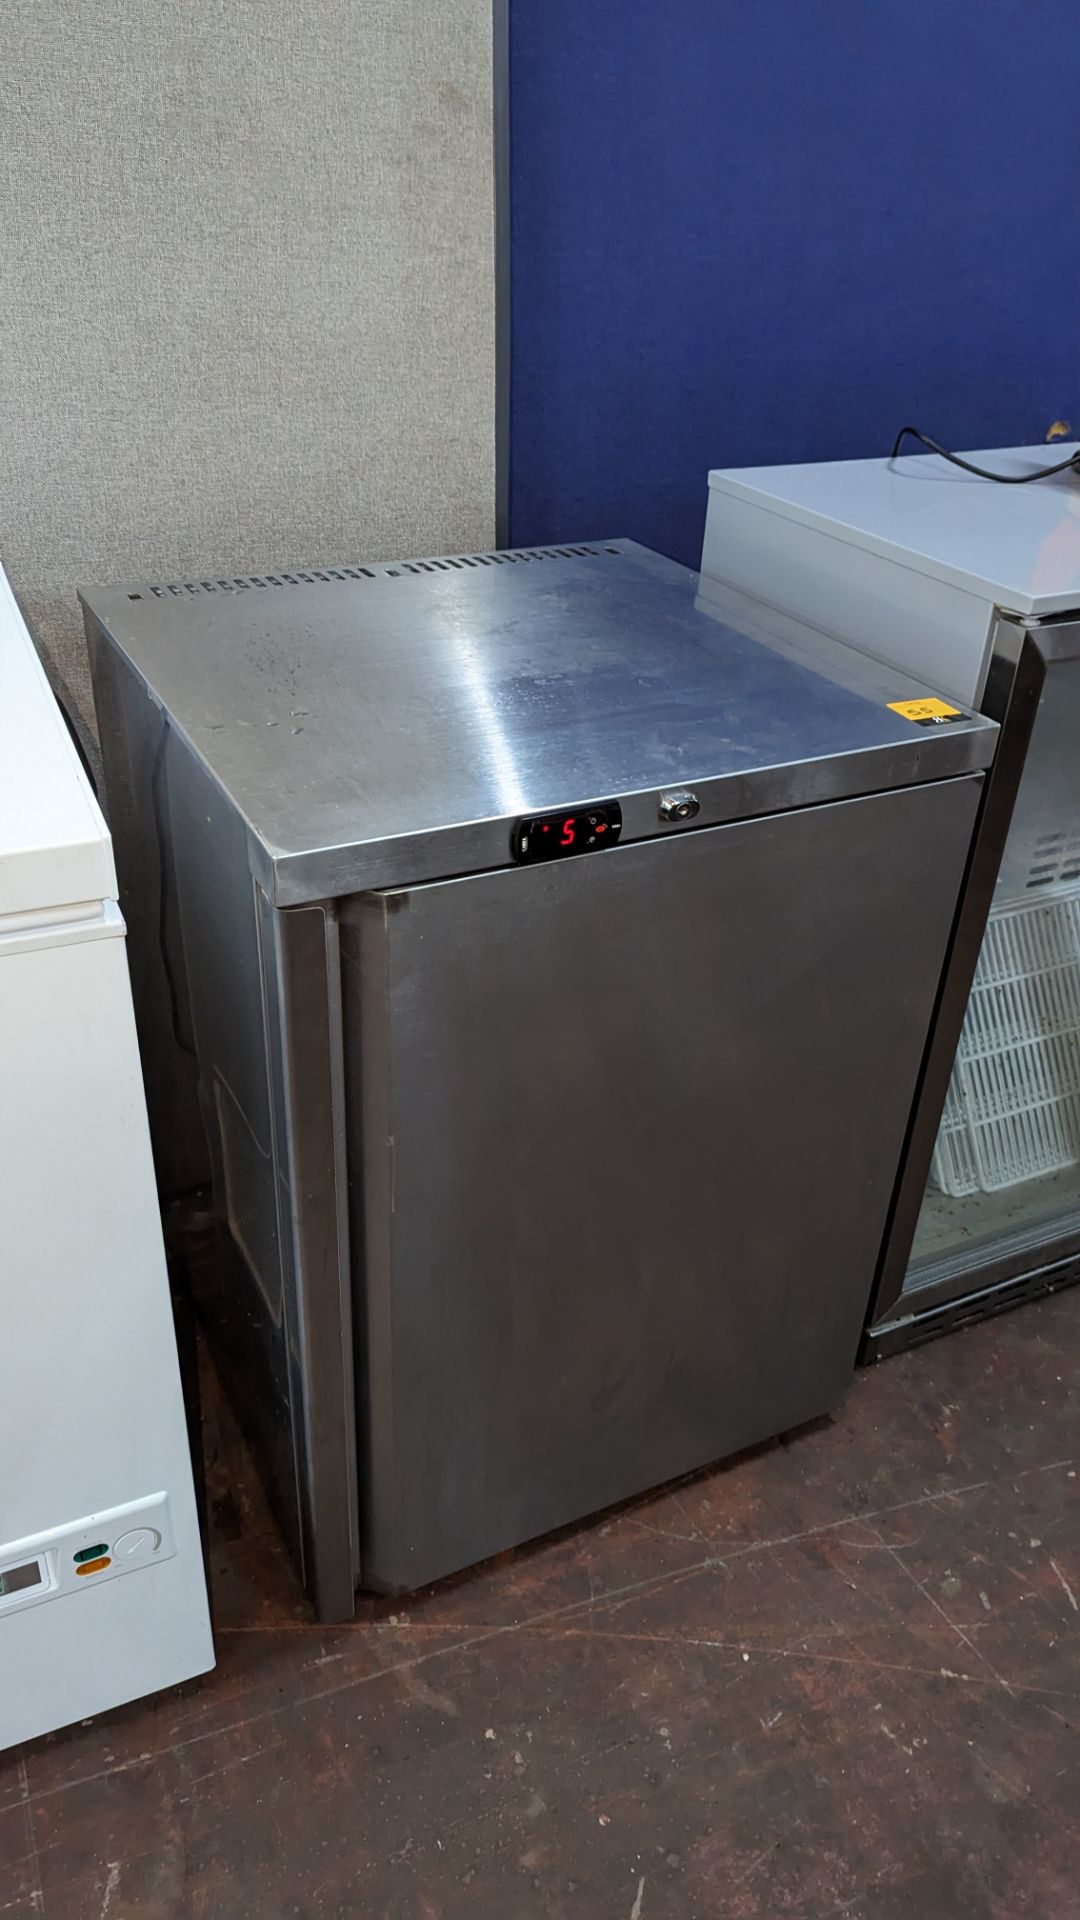 Stainless steel under counter freezer. Understood to have been purchased new in late 2018 - Image 3 of 8